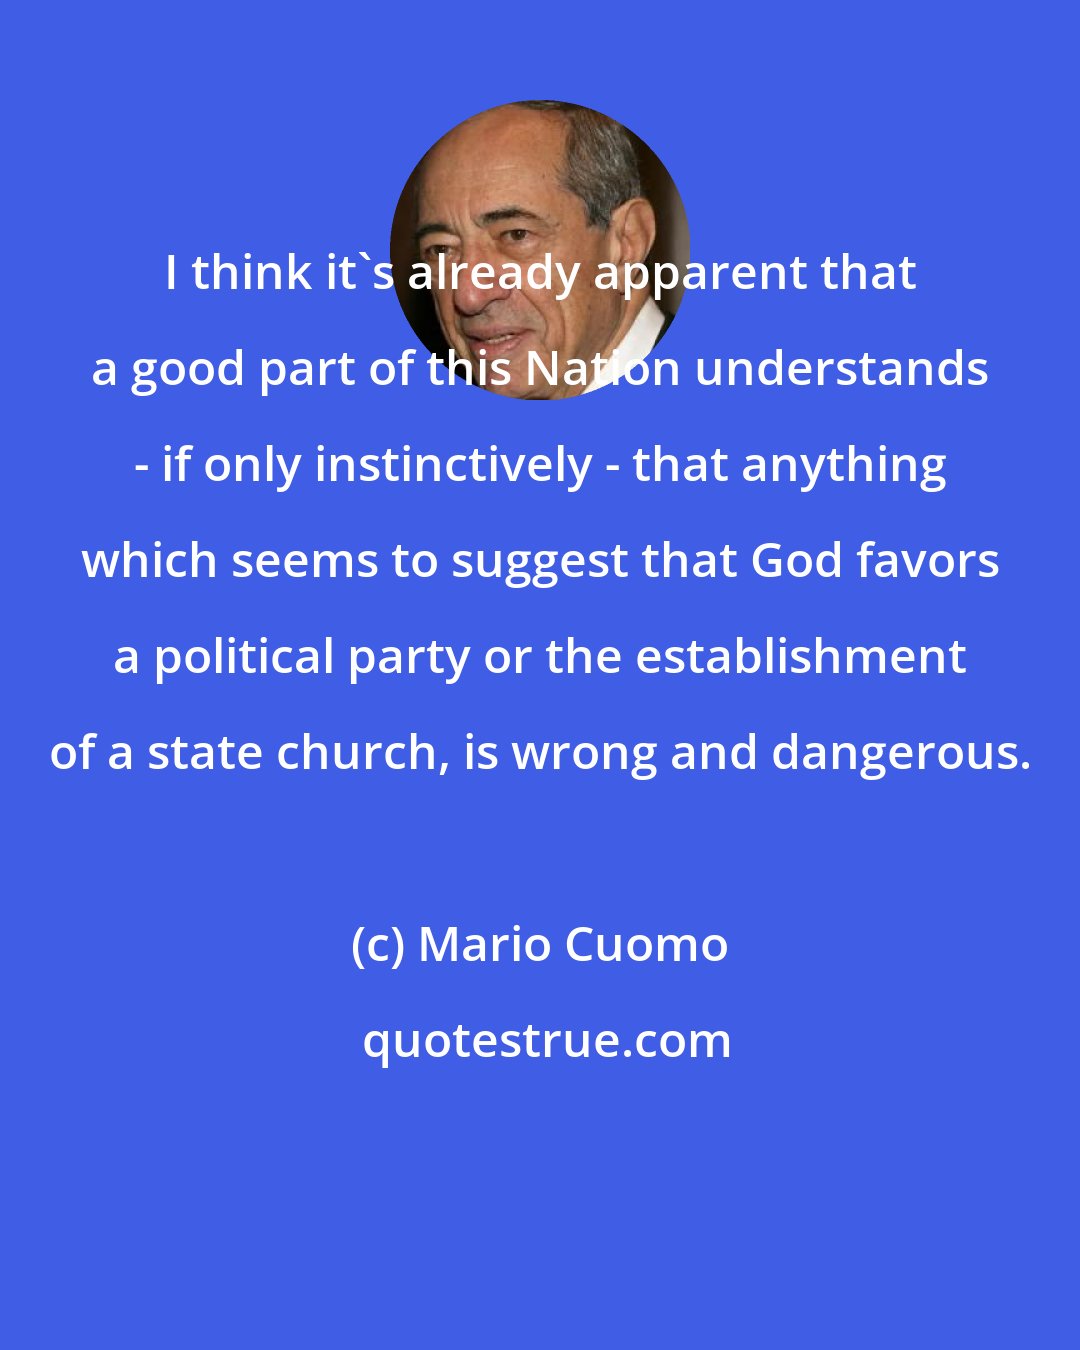 Mario Cuomo: I think it's already apparent that a good part of this Nation understands - if only instinctively - that anything which seems to suggest that God favors a political party or the establishment of a state church, is wrong and dangerous.